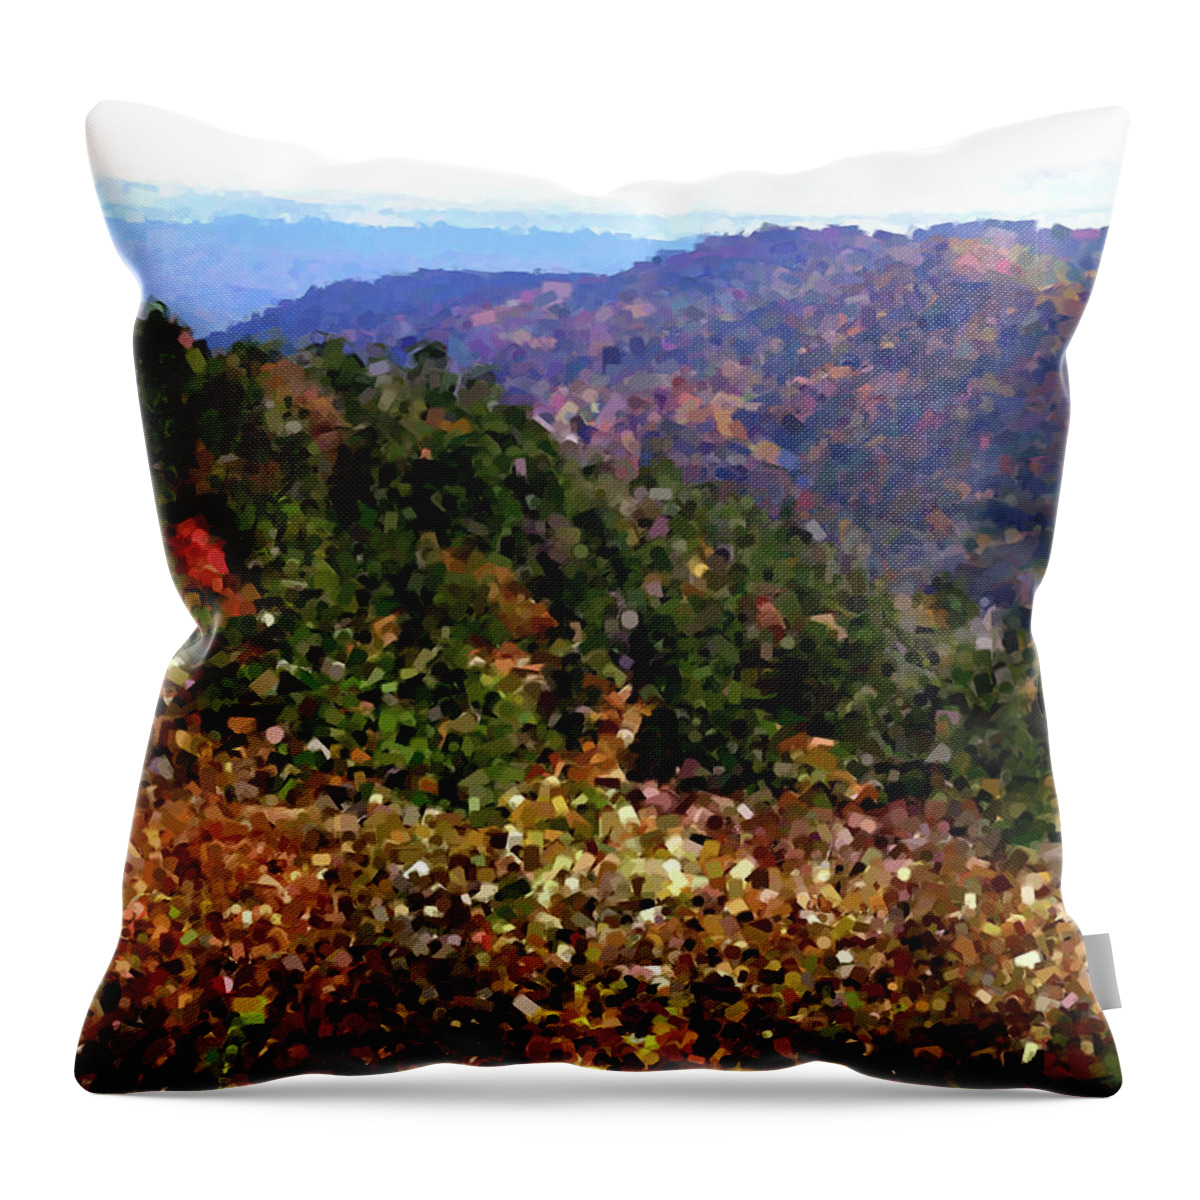 Tennessee Throw Pillow featuring the digital art Tennessee by Phil Perkins